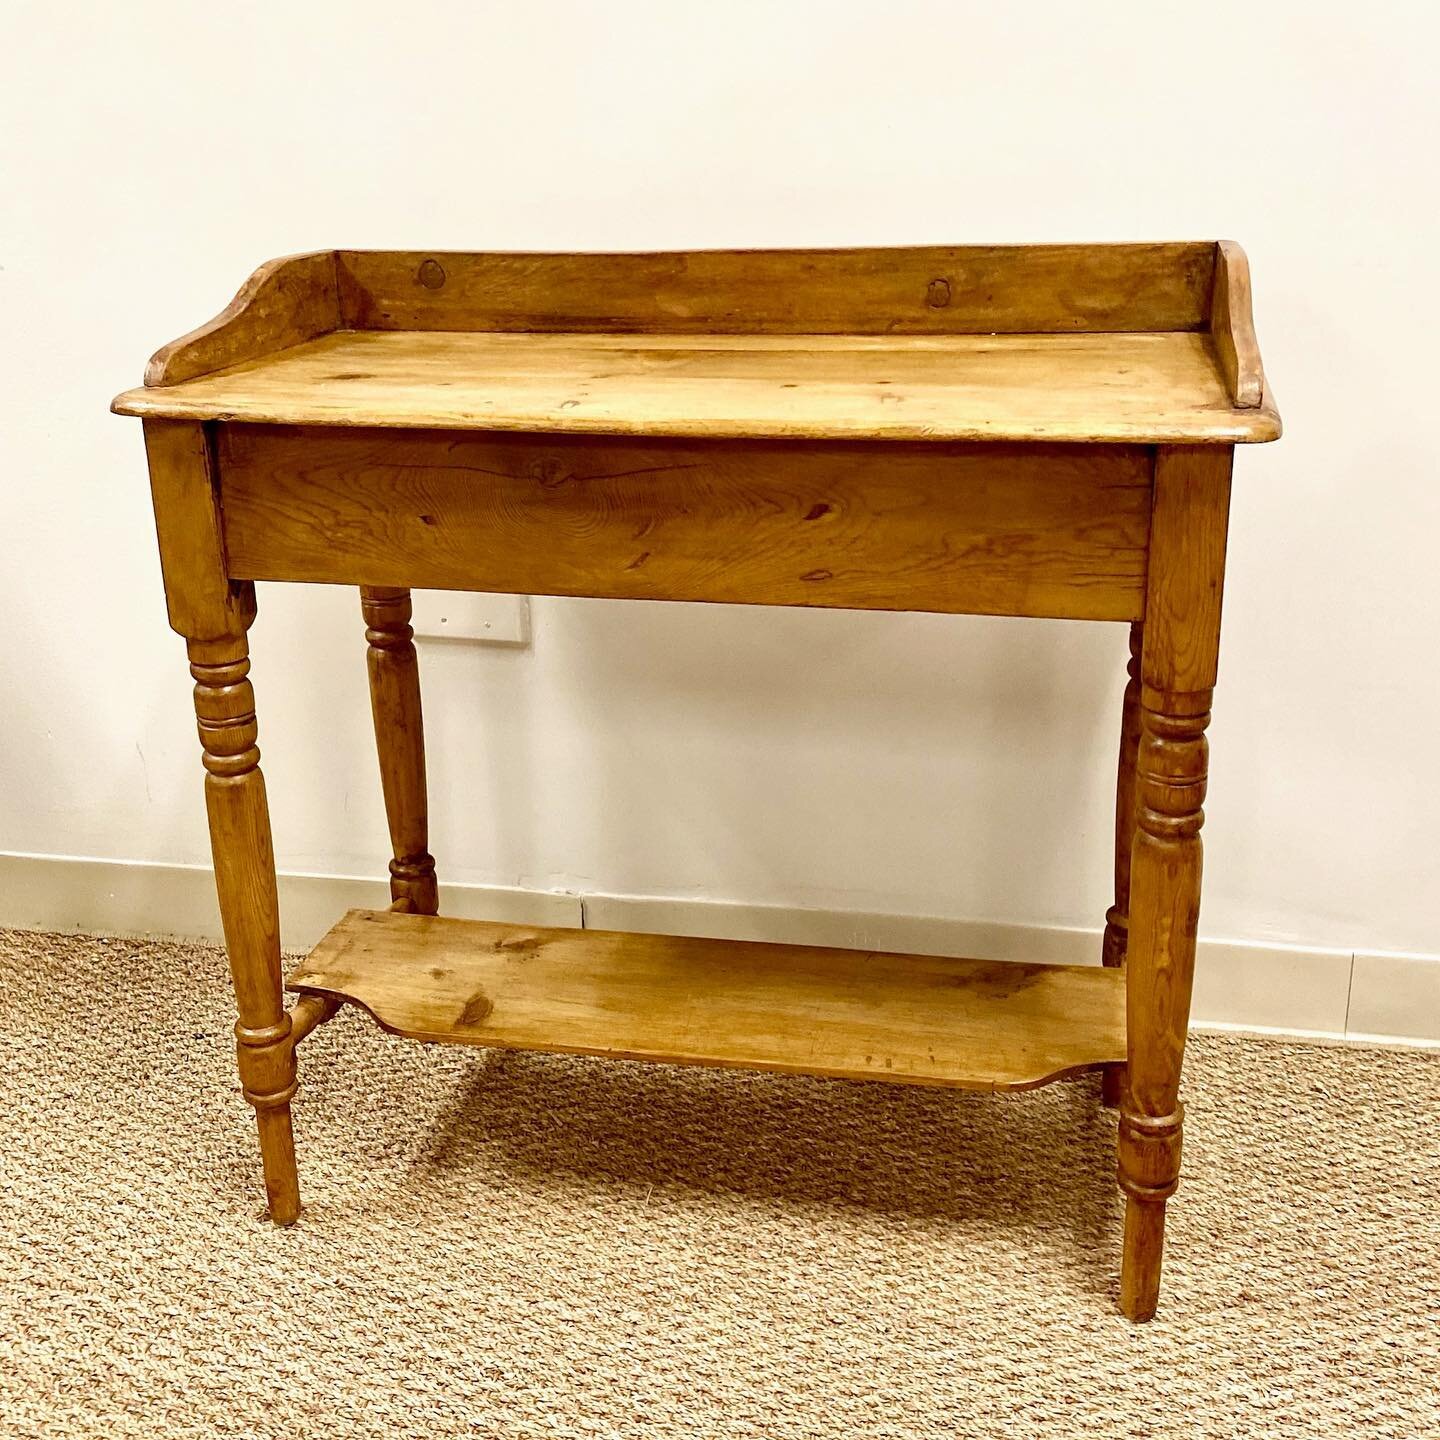 New Inventory for a New Week&hellip;Love this Antique Pine Table from our latest shipment! #antiques #antiquedealersofinstagram #antiquespine #englishantiques